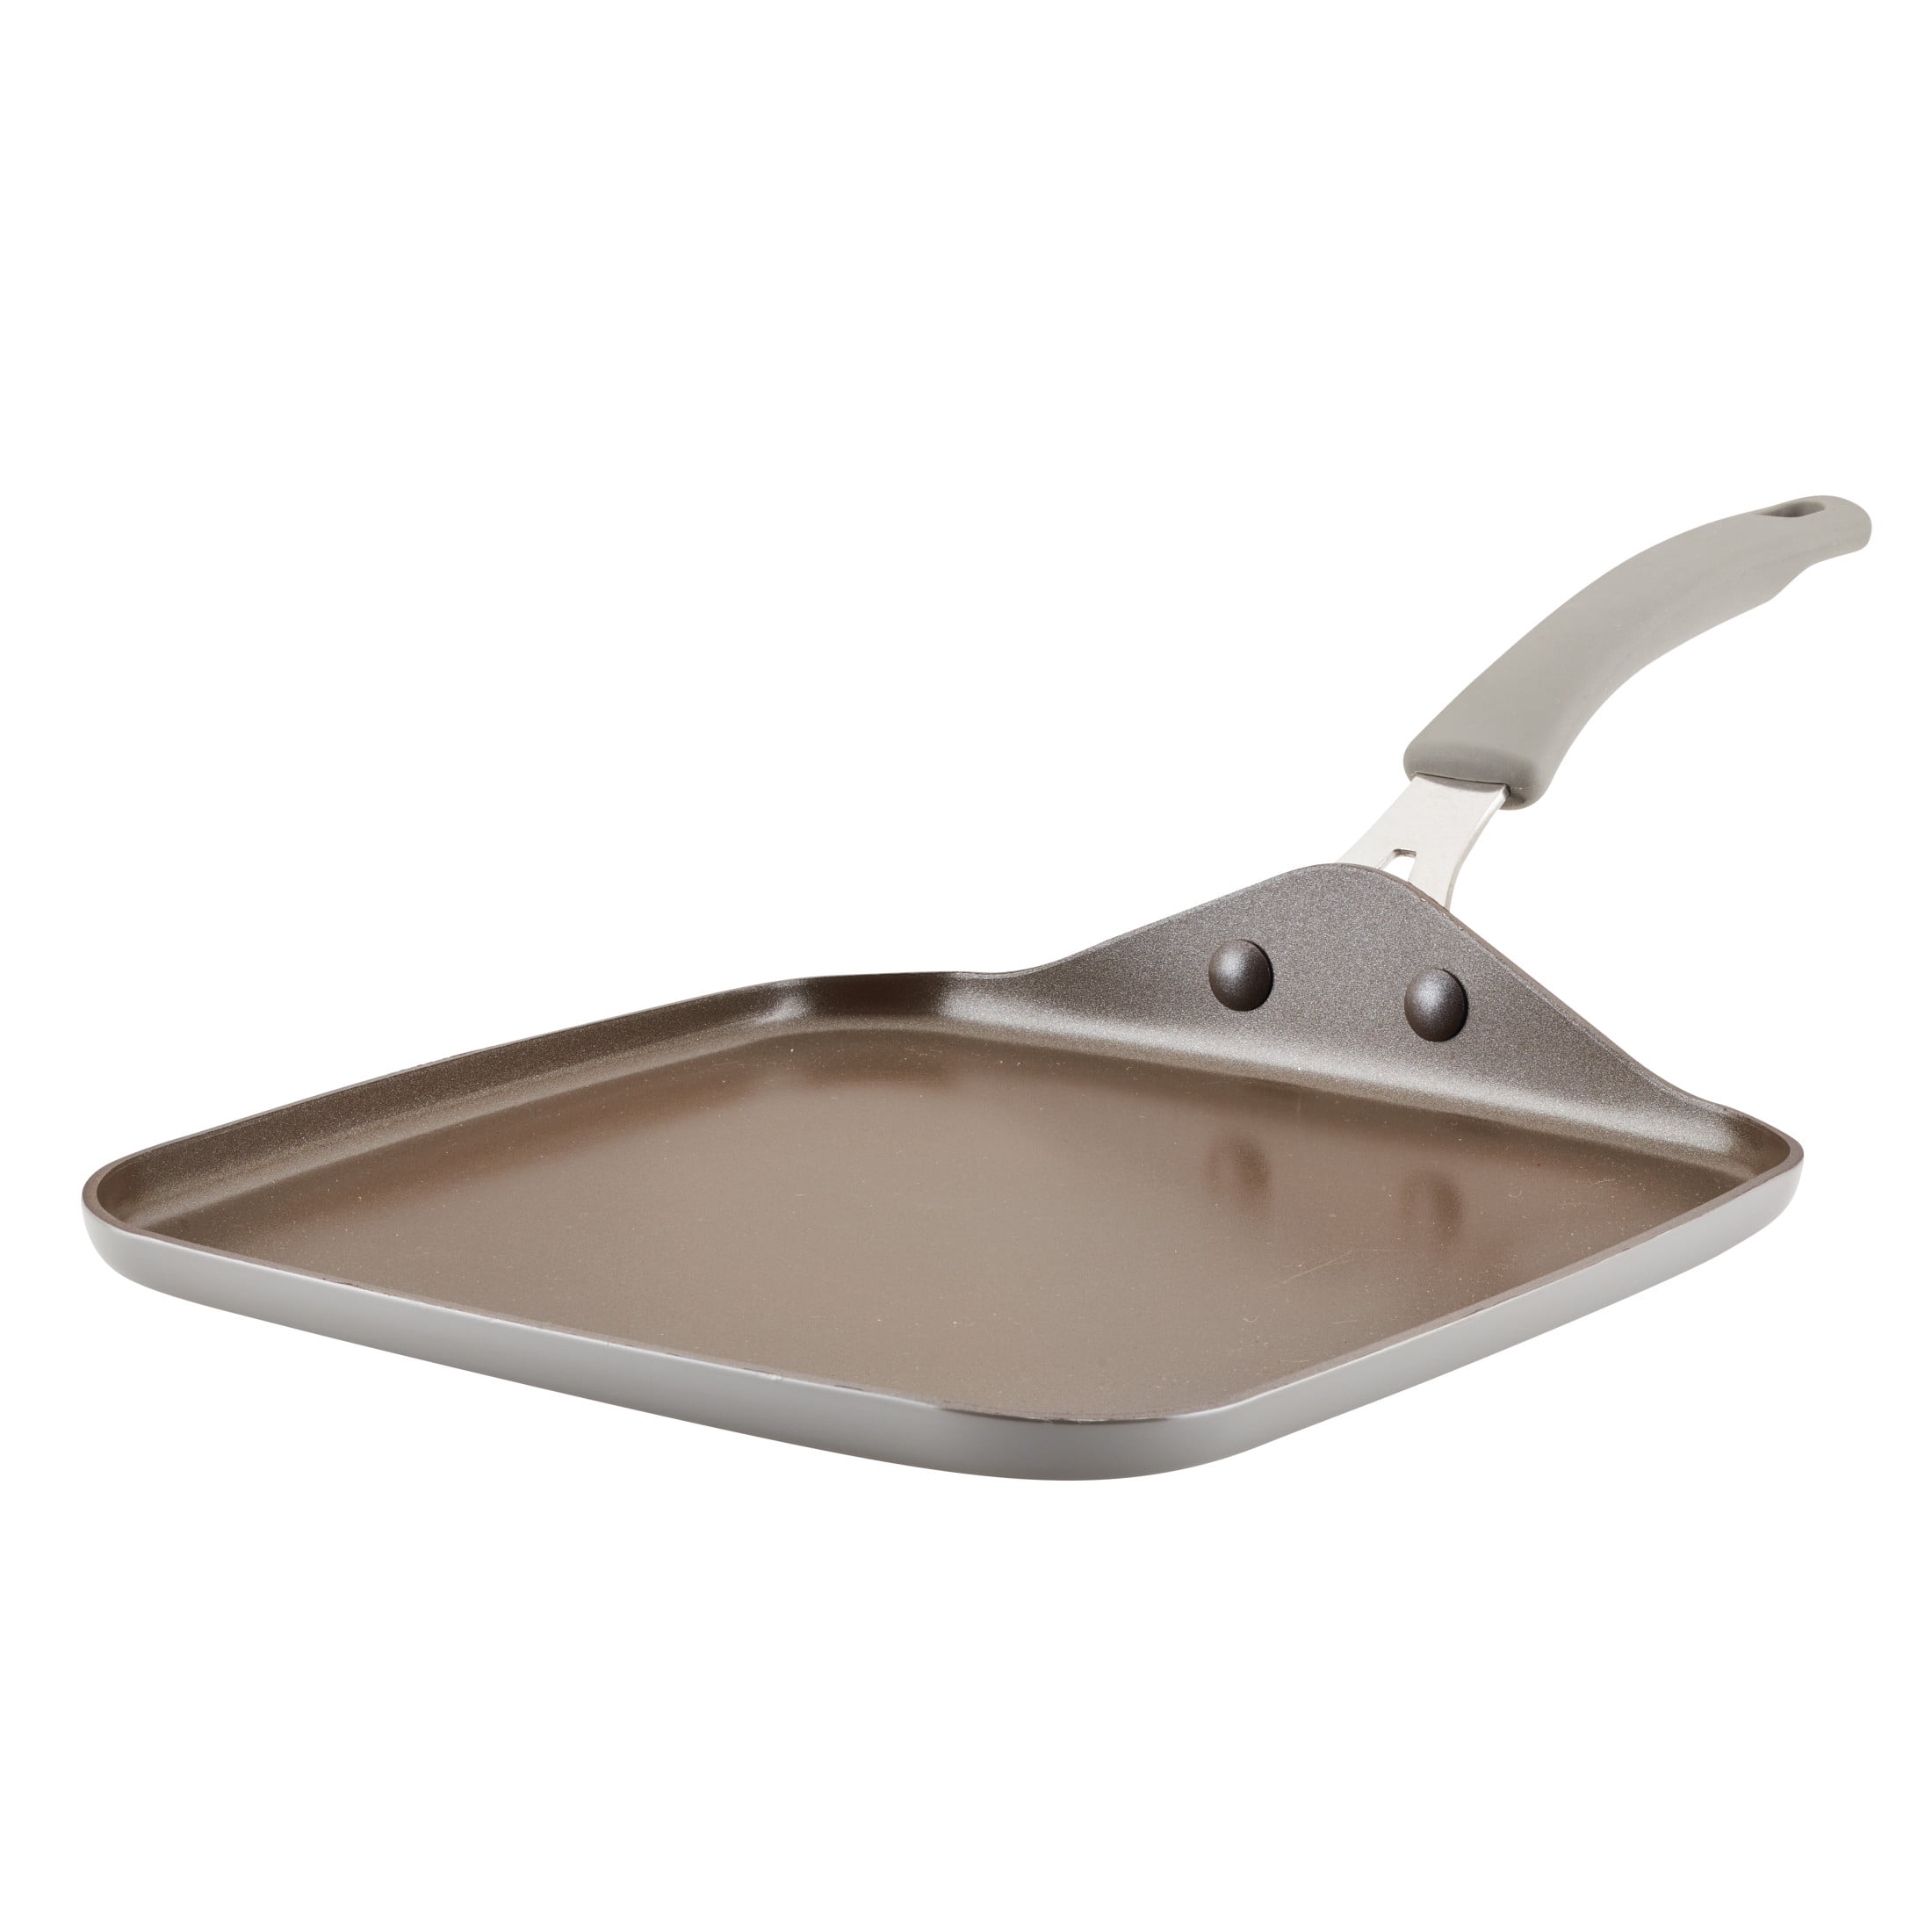 Order a Durable & Functional Nonstick Grill Pan for All Stove Top